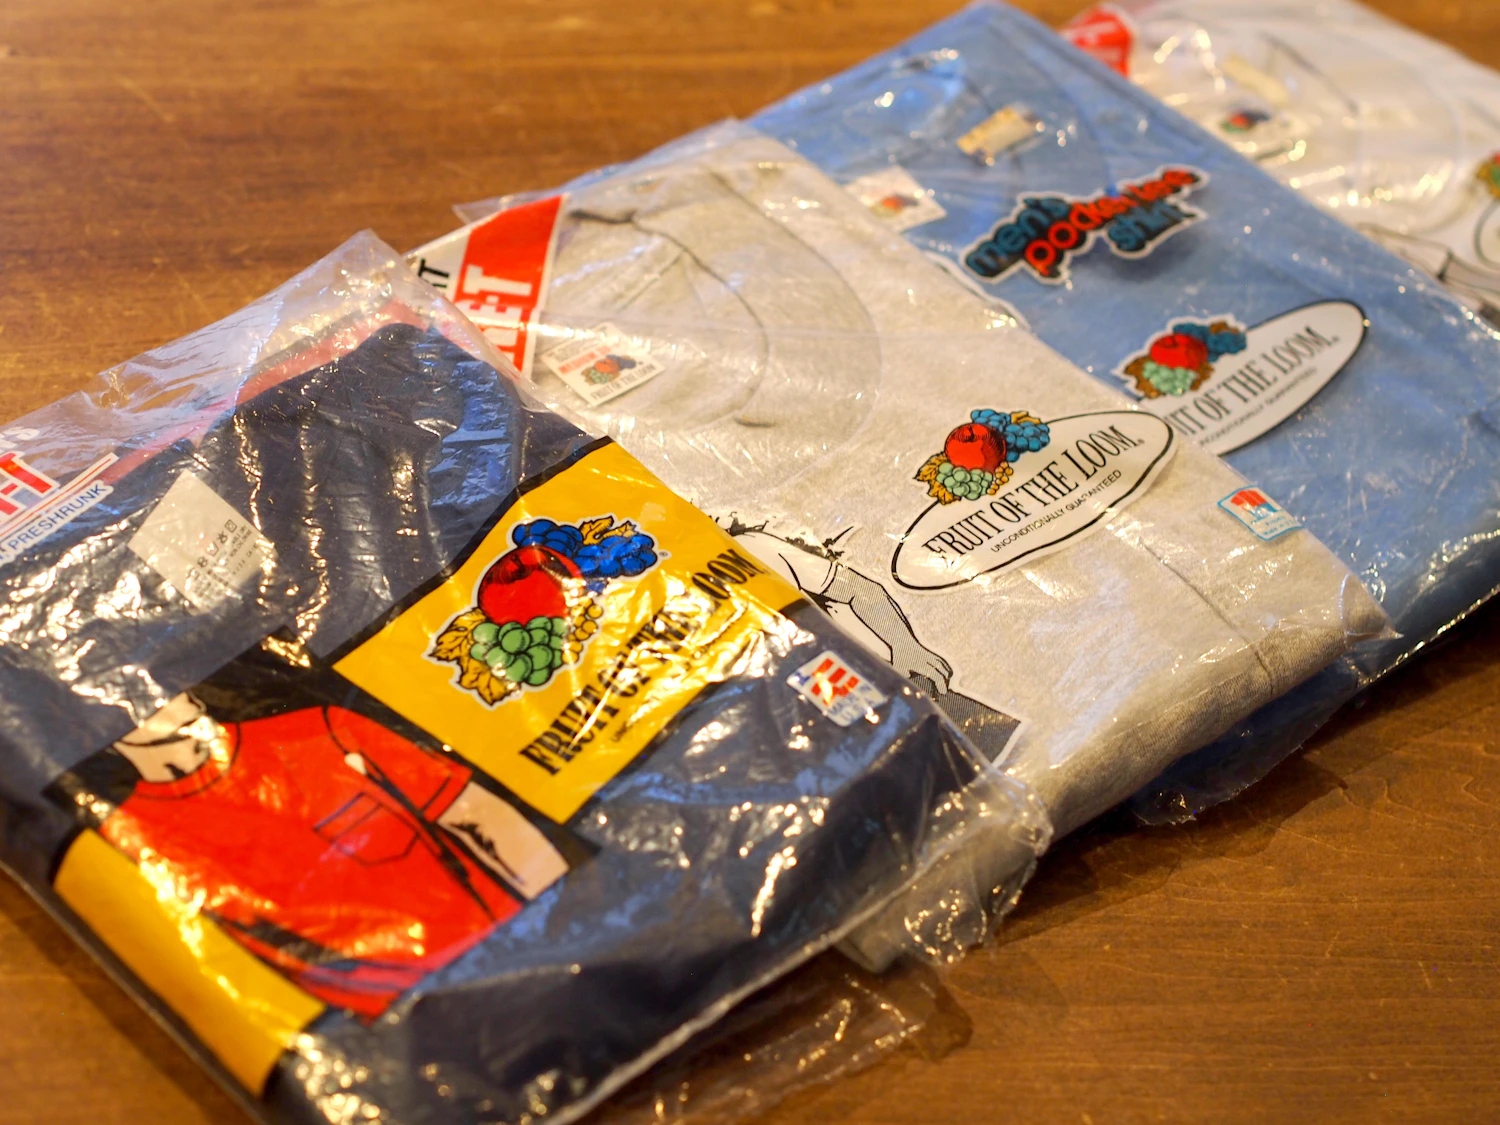 Pocket-pack T-shirts from the 1980s stored as dead stock